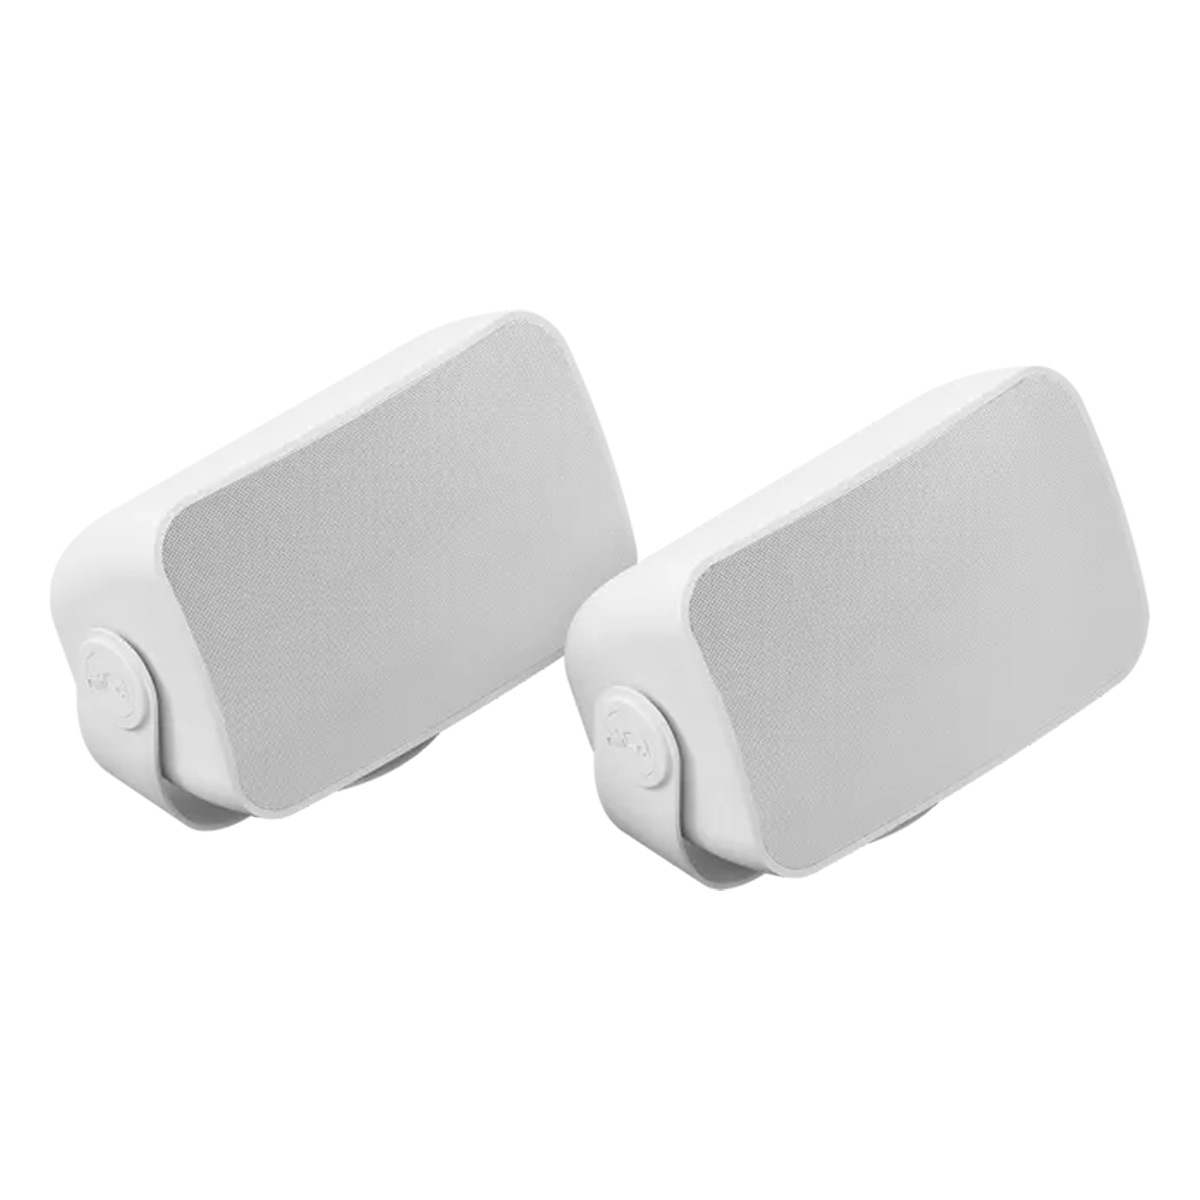 Sonos OUTDRWW1 Outdoor Architectural Speakers - Pair (White) - image 1 of 8